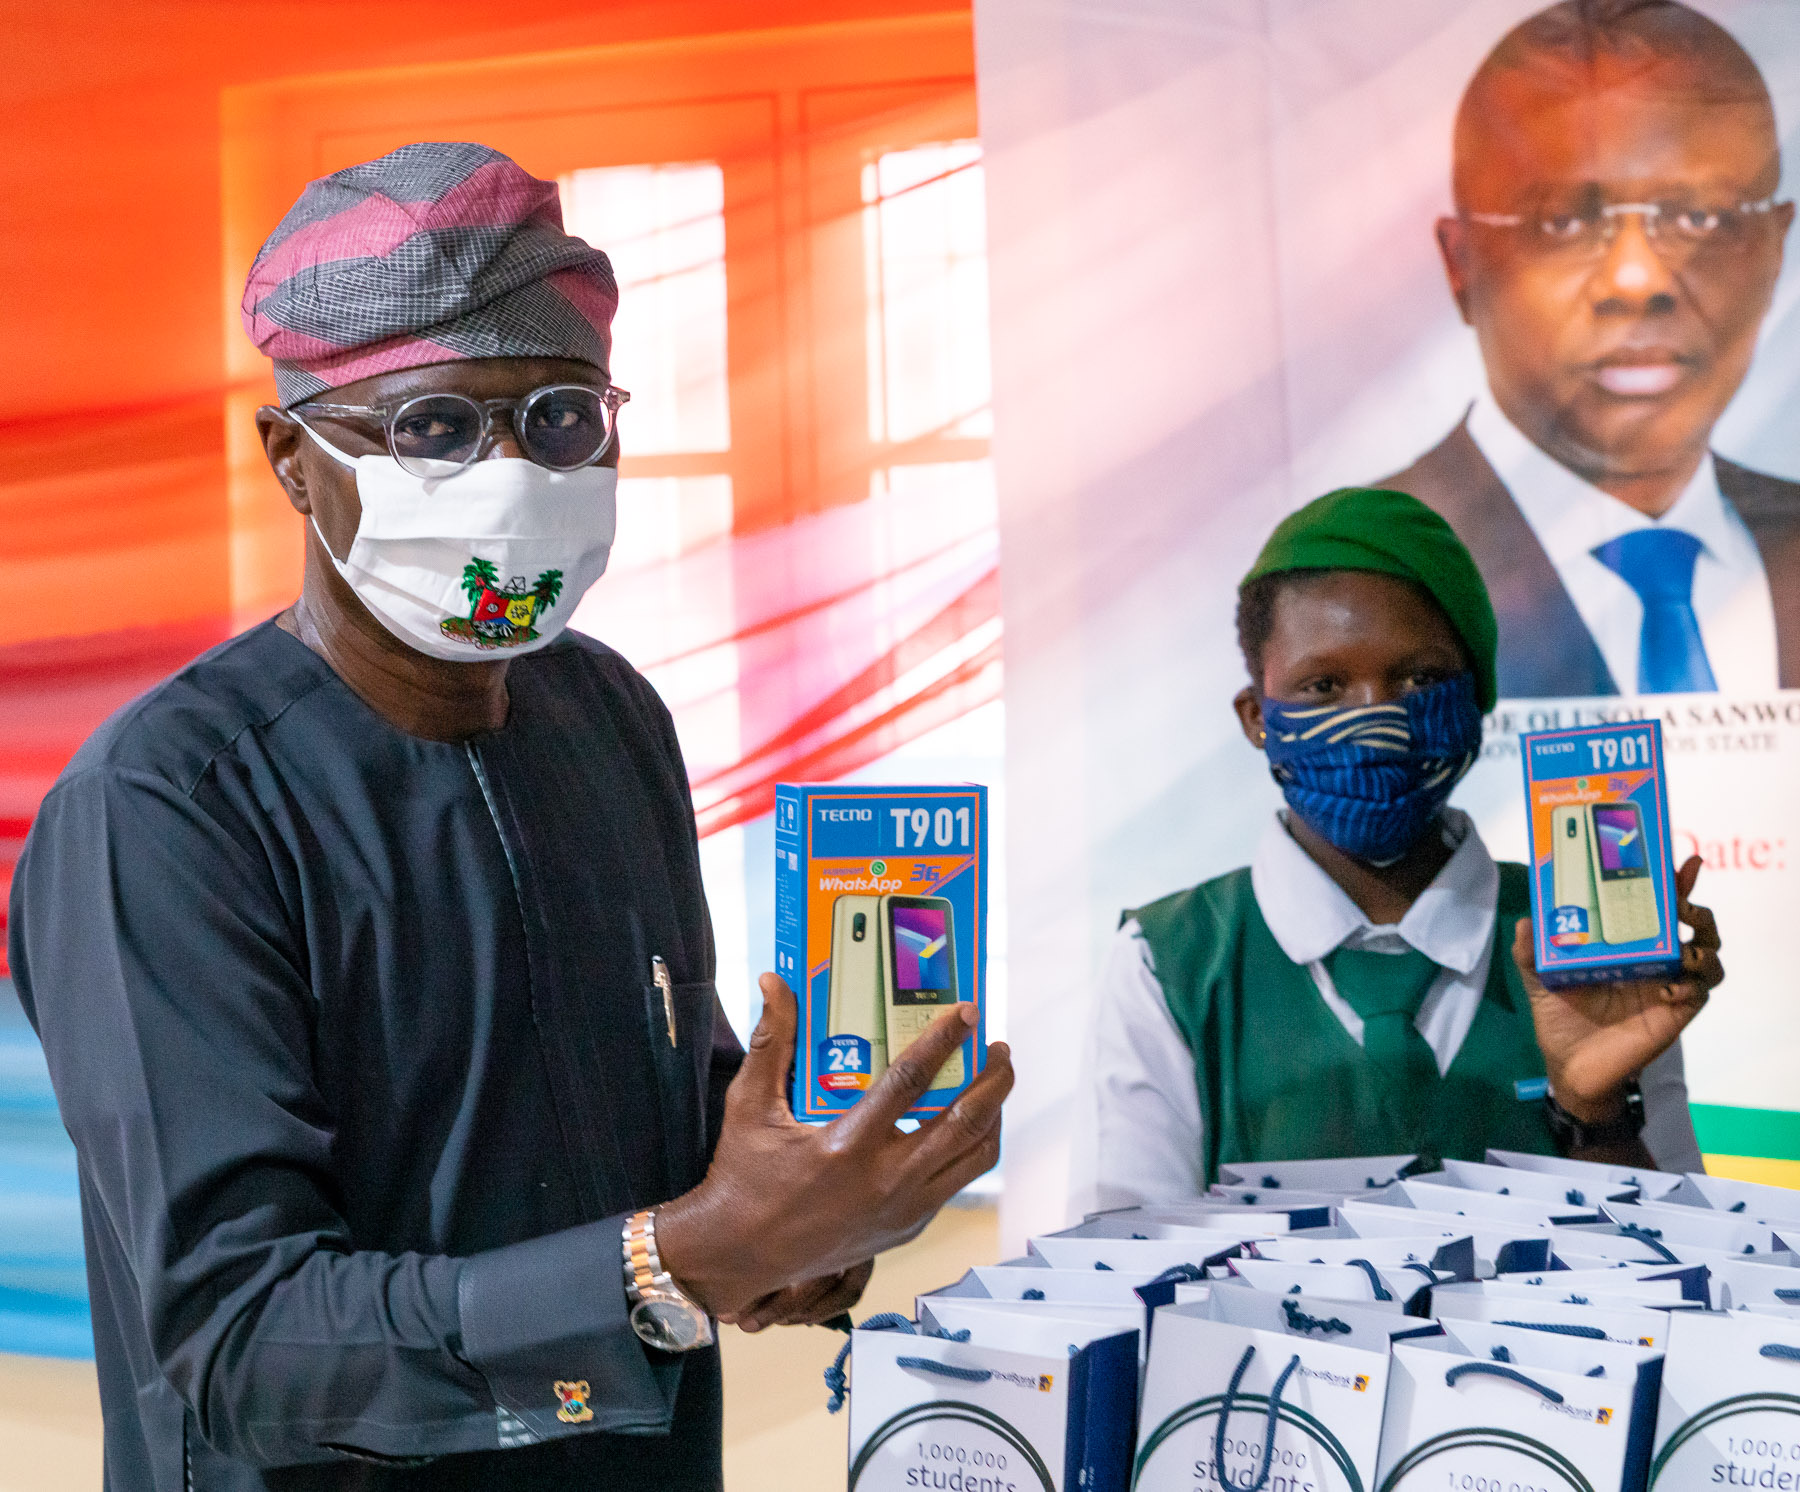 L-R: Lagos State Governor, Mr. Babajide Sanwo-Olu, with beneficiary, Miss Sherifat Umar of Elegbata Senior High school, Lagos Island, during the presentation of 20,000 E-Learning devices for Lagos State Schools by First Bank at the Lagos House, Marina, on Thursday, June 11, 2020.